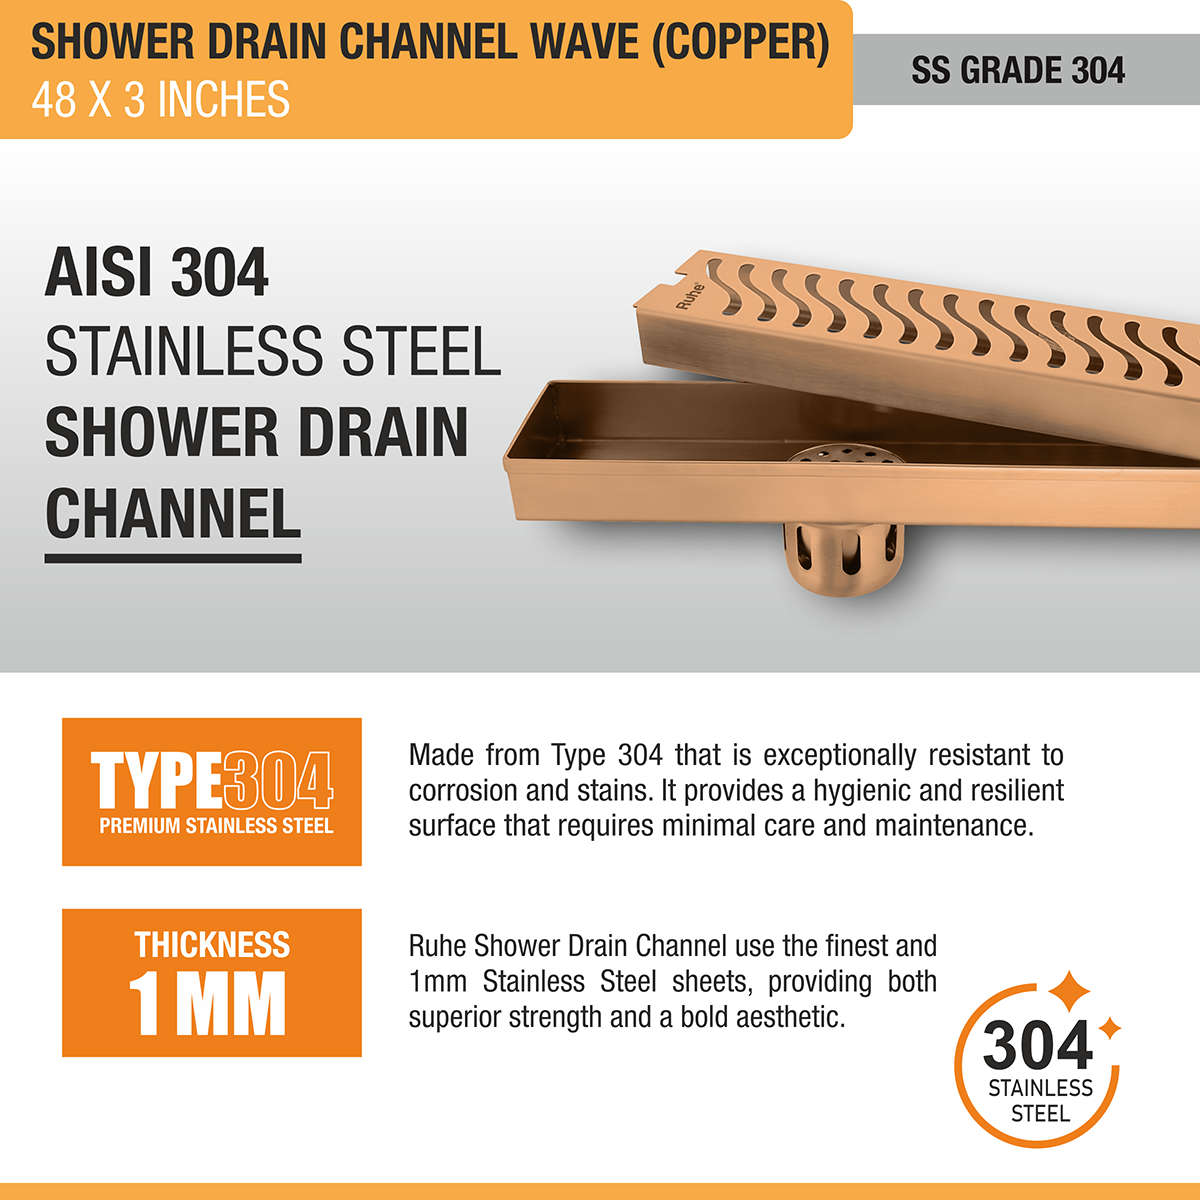 Wave Shower Drain Channel (48 x 3 Inches) ROSE GOLD/ANTIQUE COPPER stainless steel